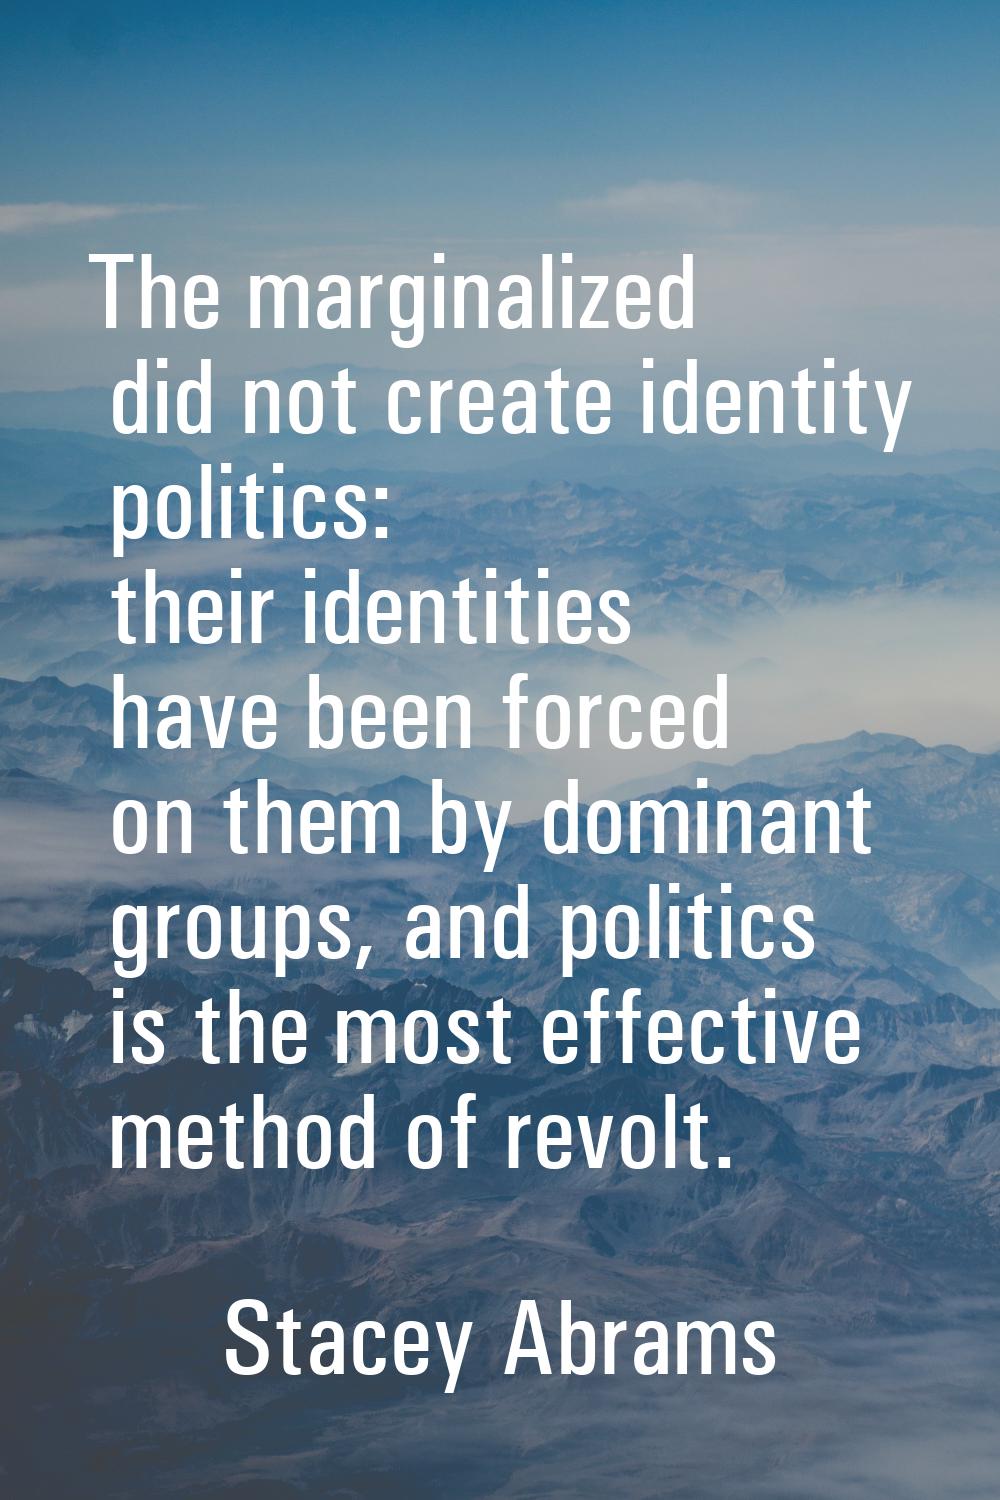 The marginalized did not create identity politics: their identities have been forced on them by dom